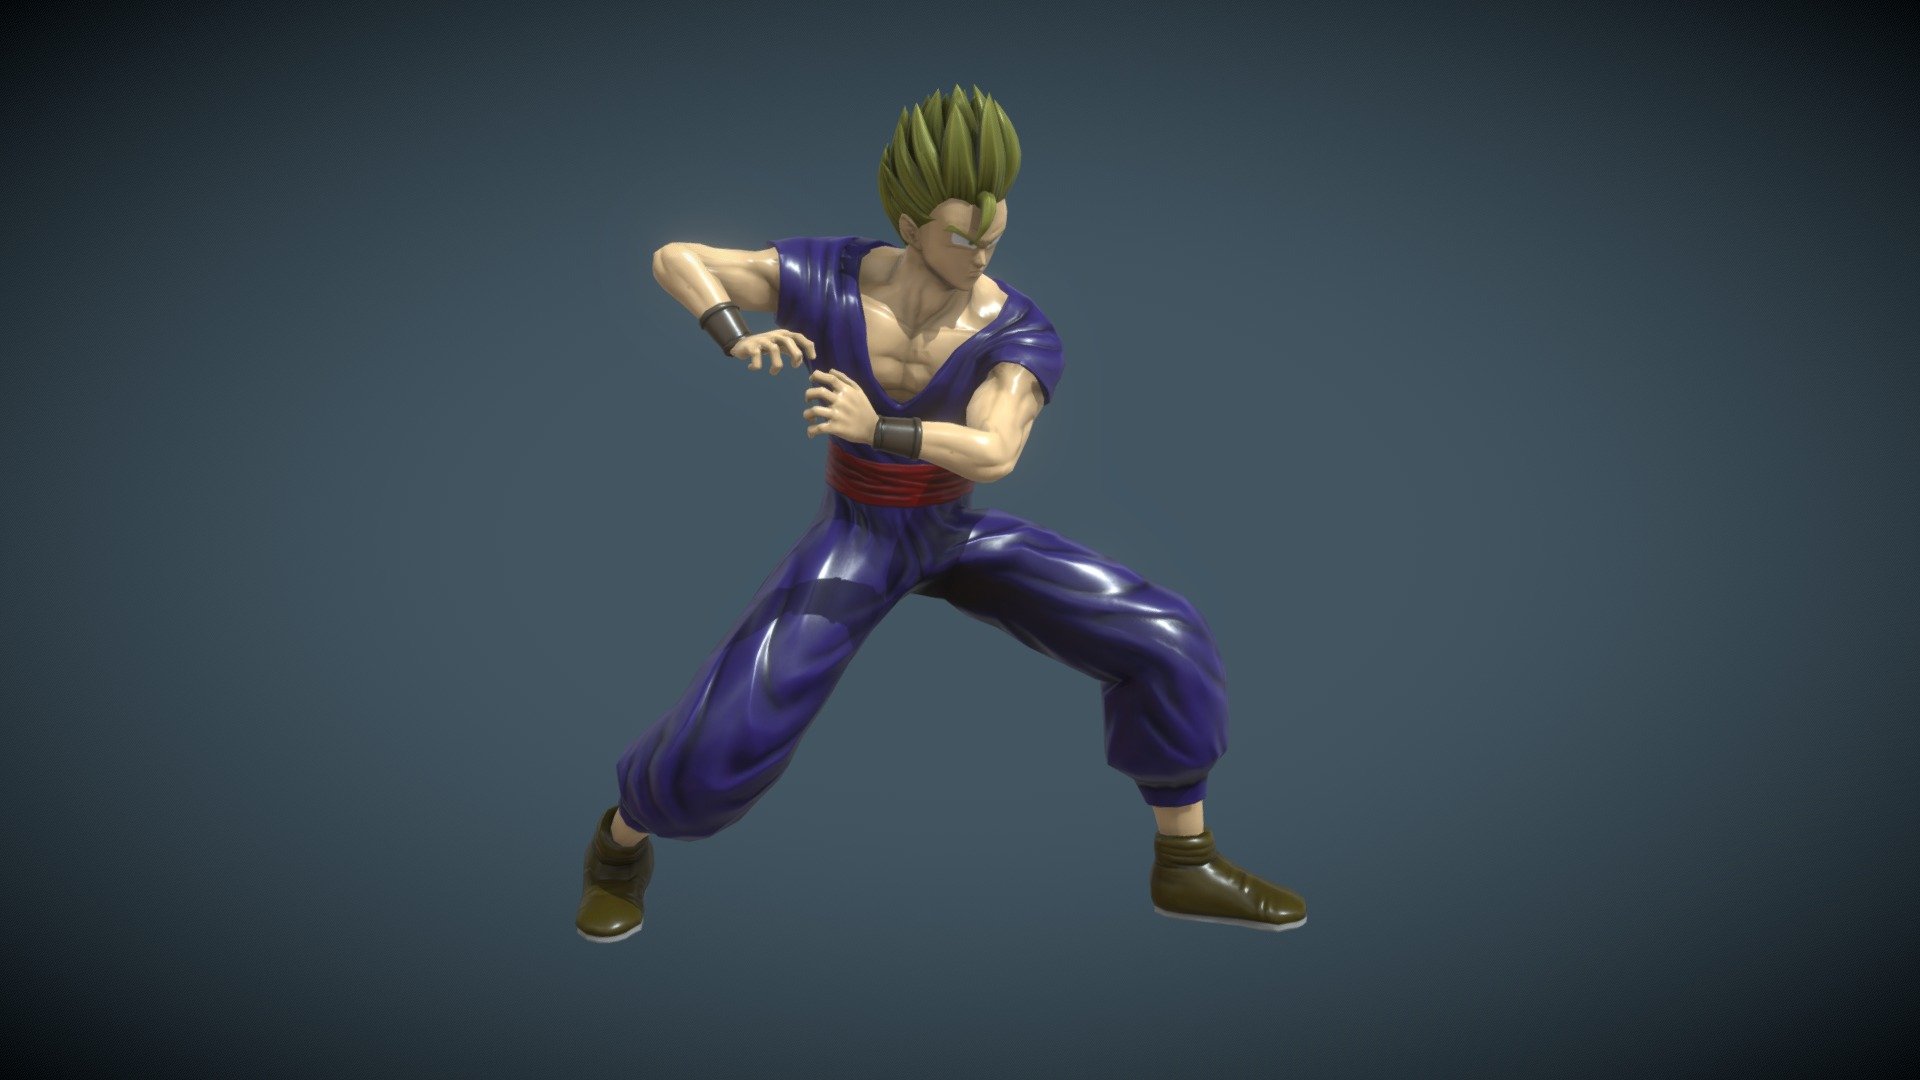 Please don't share this illegally, it's cheap and my designs and crafts are my only income.

3D Model Dragon Ball Super: Superhero - Gohan - Dragon Ball Super: Superhero - Buy Royalty Free 3D model by kevin yataco (@kevinyataco) 3d model